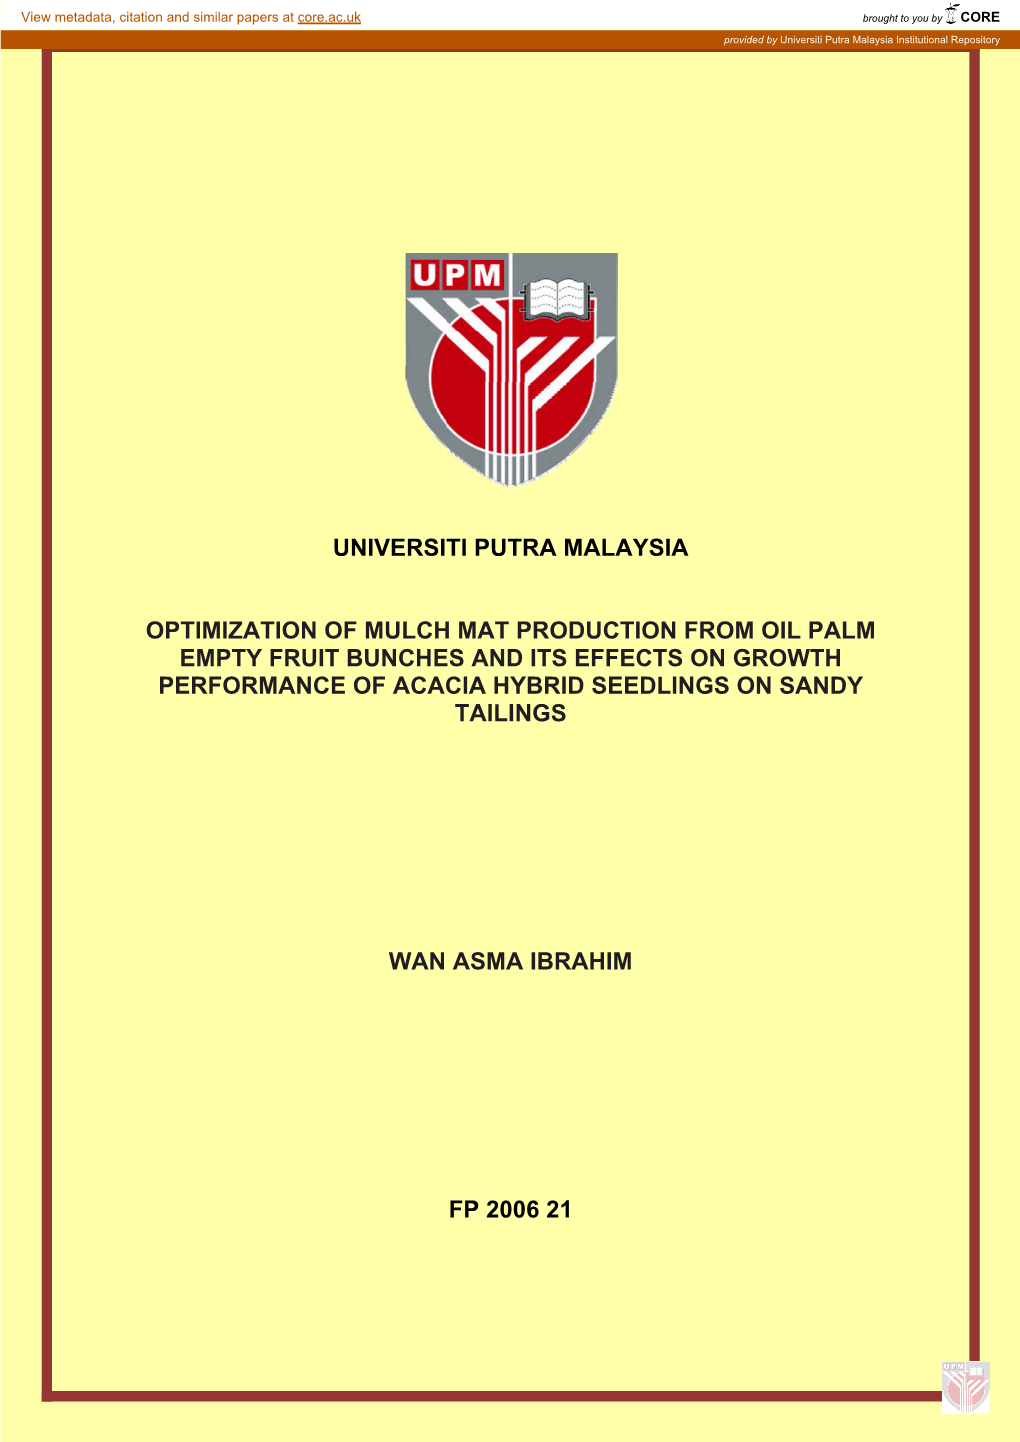 Universiti Putra Malaysia Optimization of Mulch Mat Production from Oil Palm Empty Fruit Bunches and Its Effects on Growth Perfo